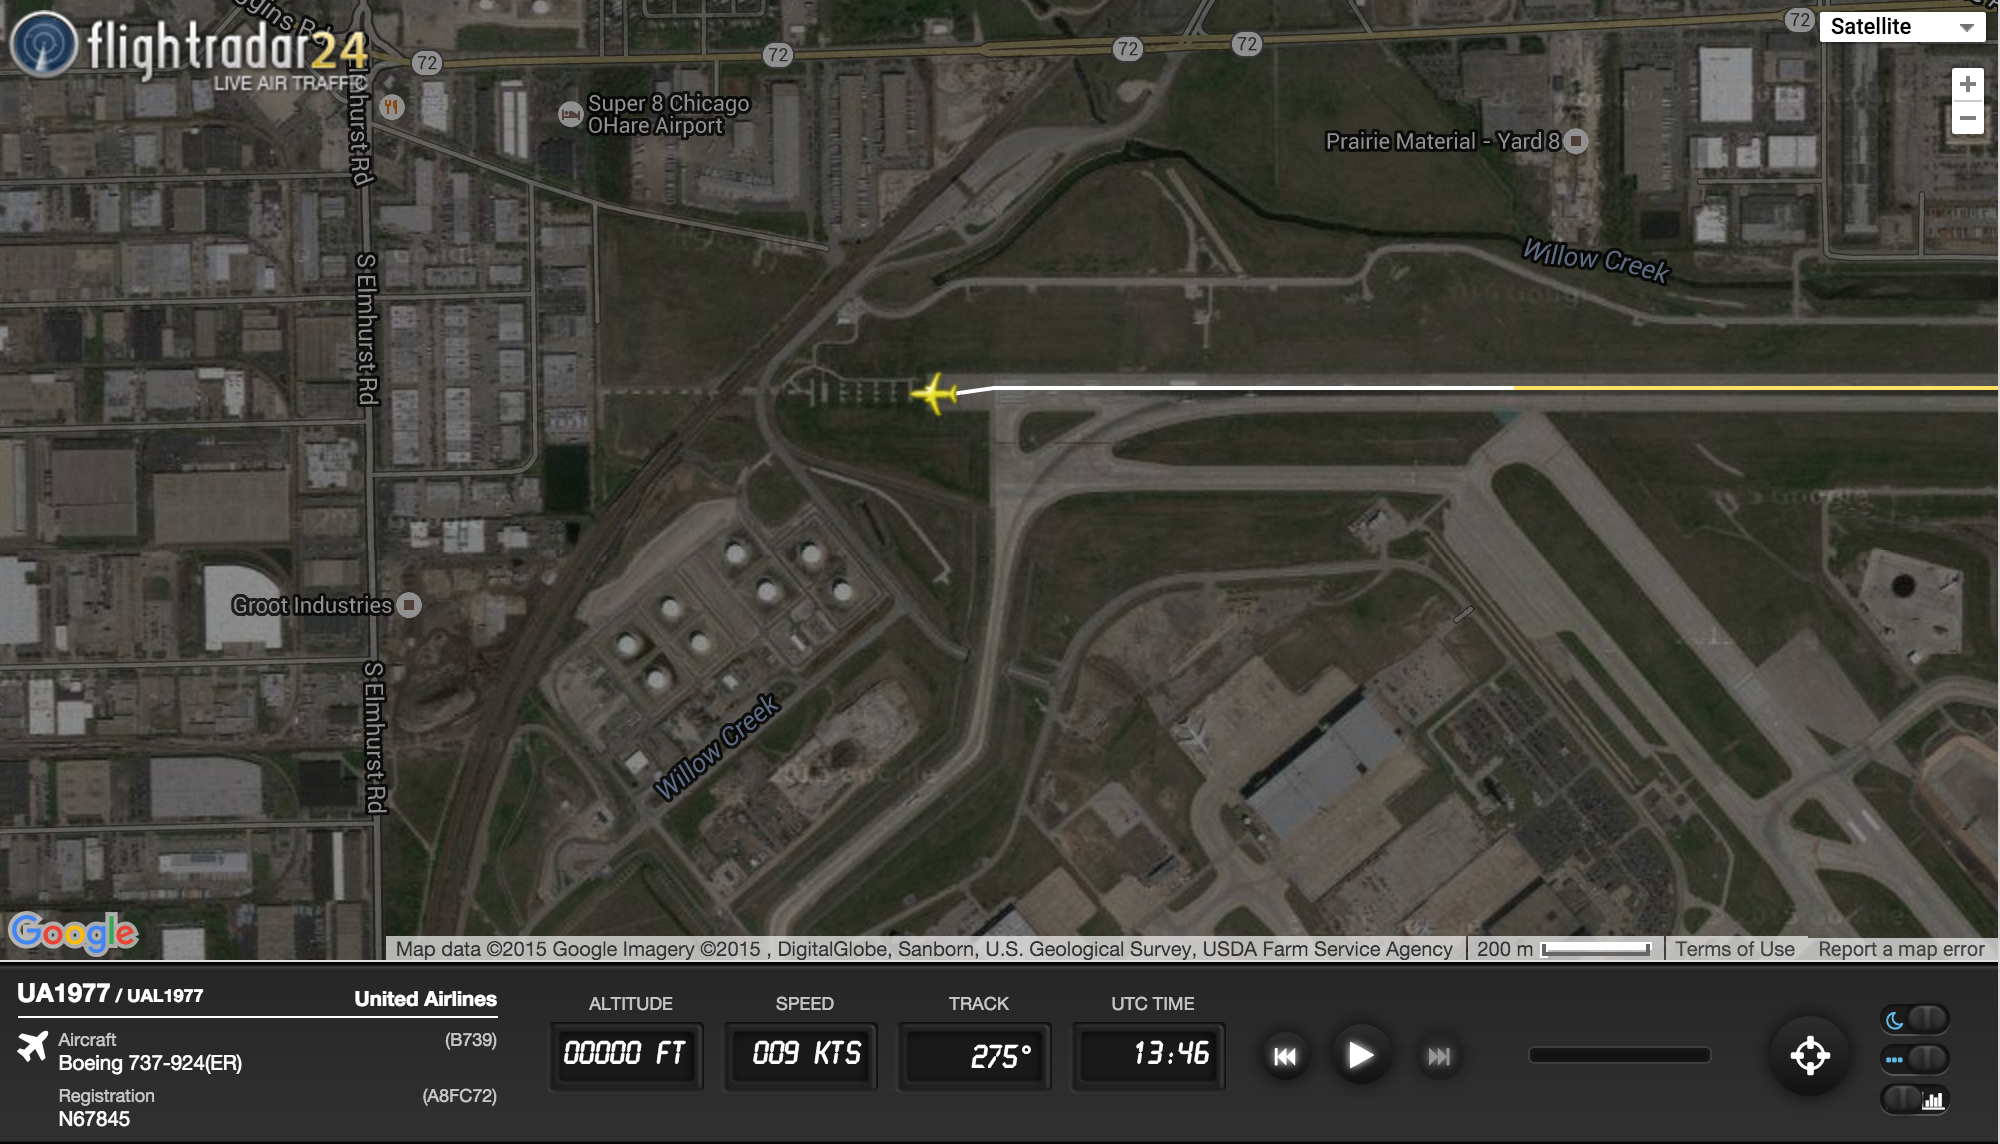 In an image provided by Flightradar24.com, here is the reported position of United Flight 1977 after it slid past the final turning point at O'Hare.